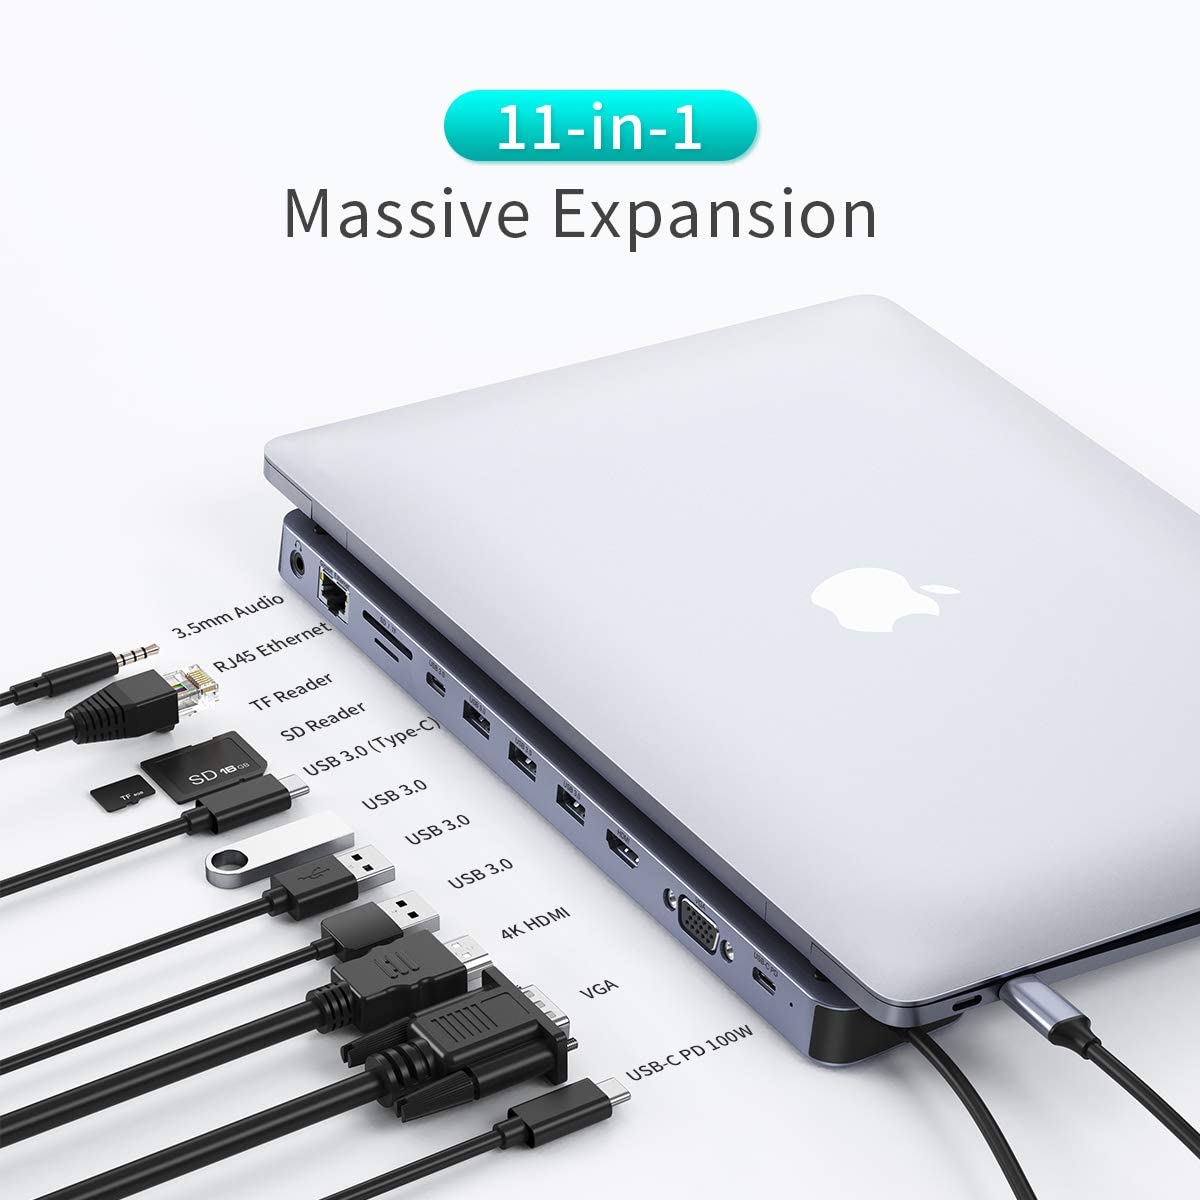 HUB-M20 Choetech 11-in-1 USB-C MacBook Pro Docking Station – CHOETECH I  POWER TO THE BEST